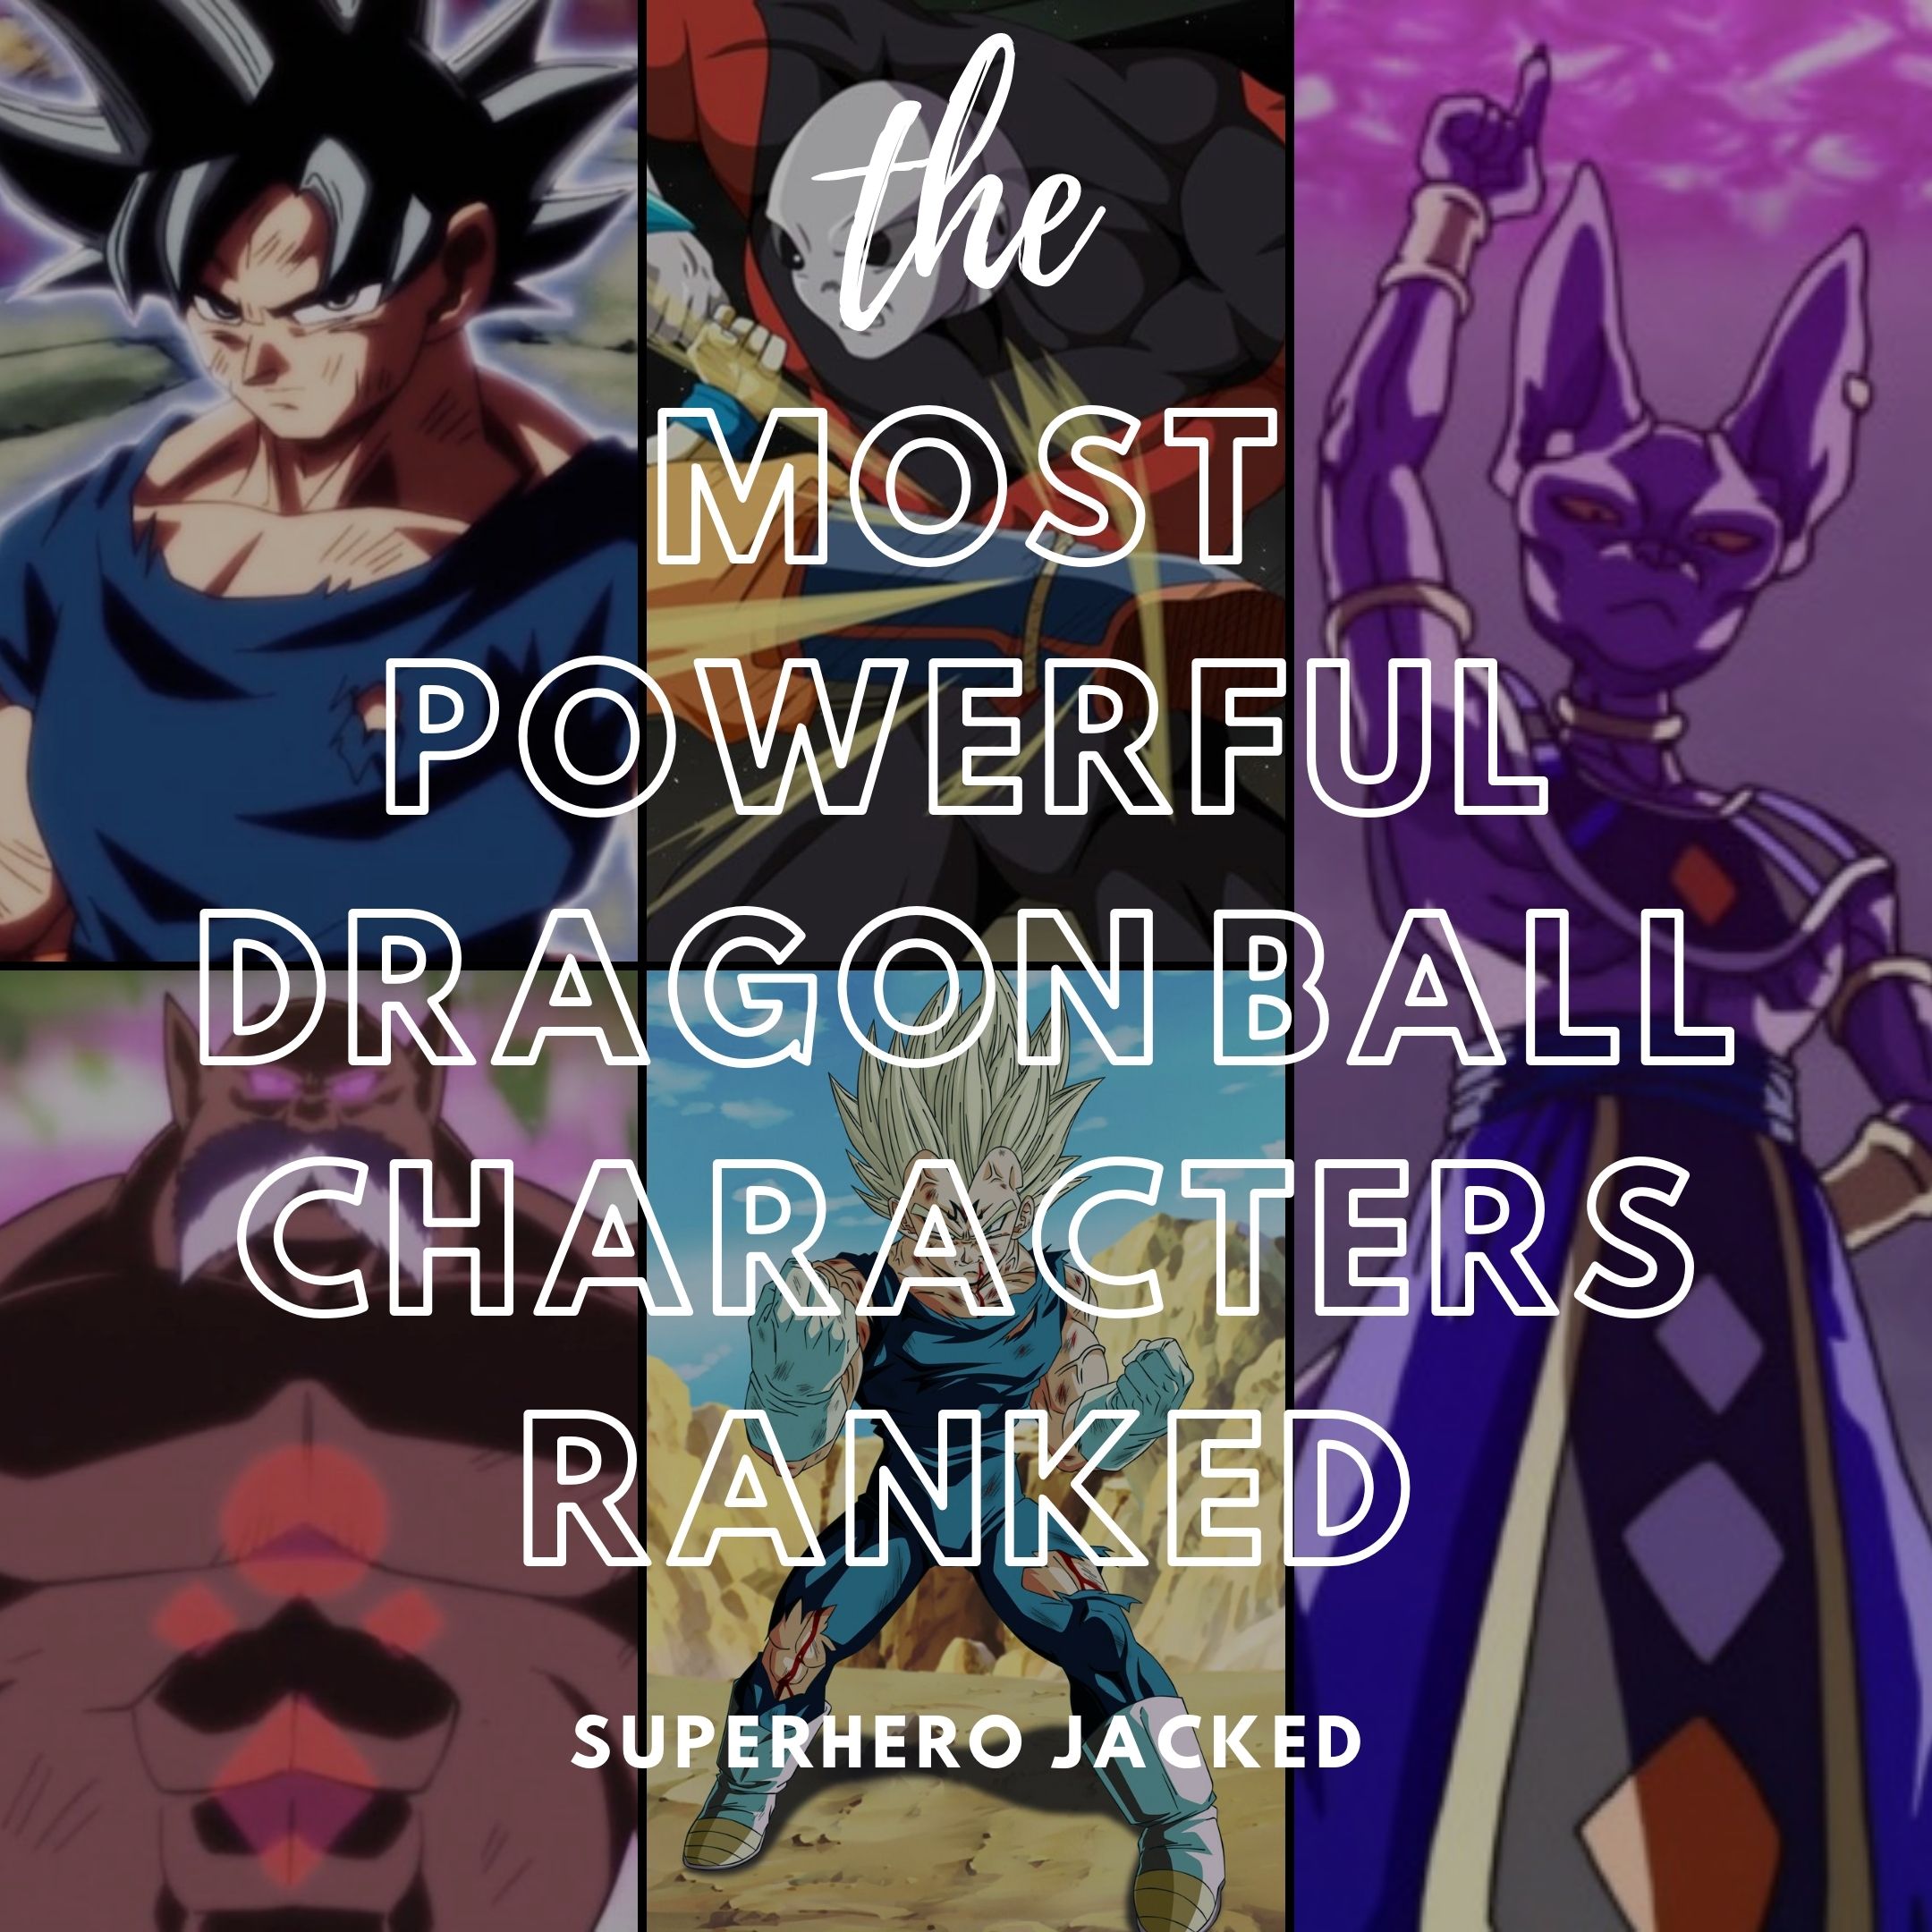 The Most Powerful Dragon Ball Characters Ranked – Superhero Jacked